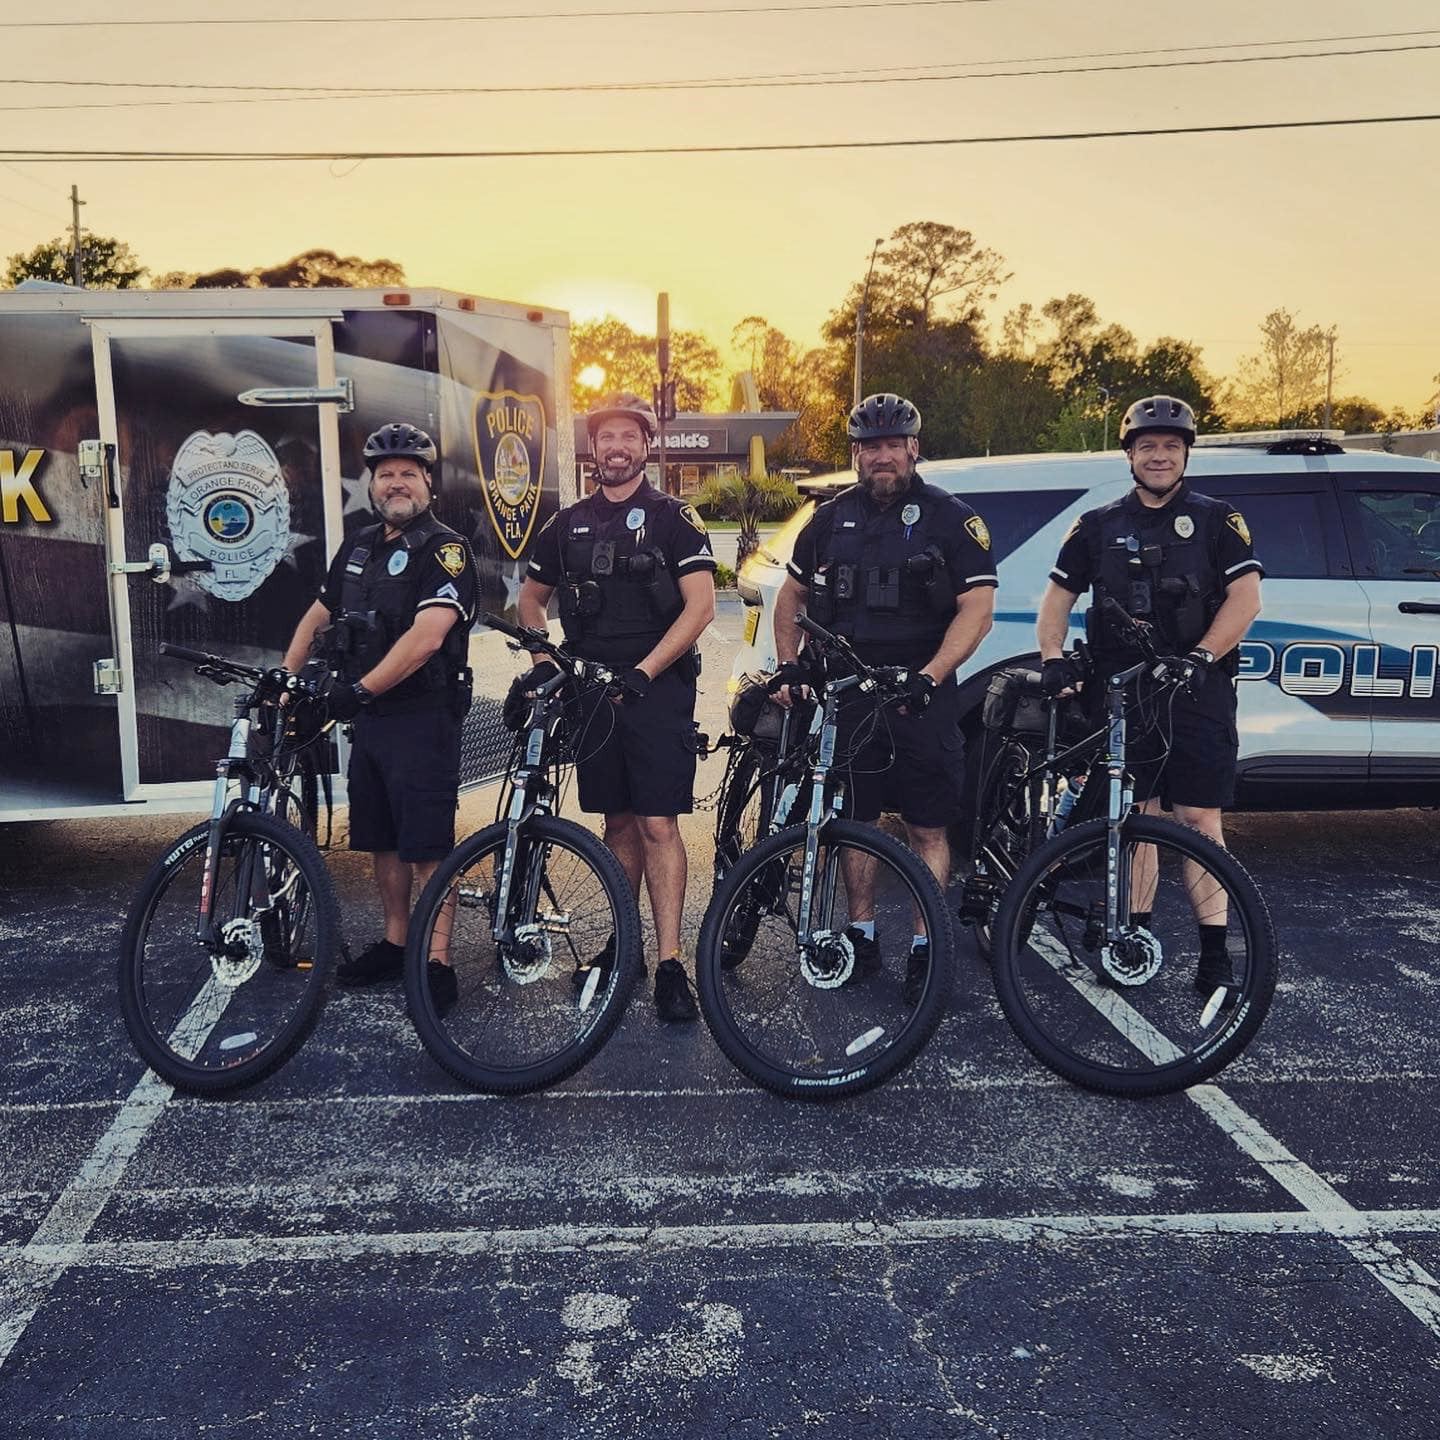 4 police officers on bikes in a parking lot with SUV police vehicle and police trailer in background